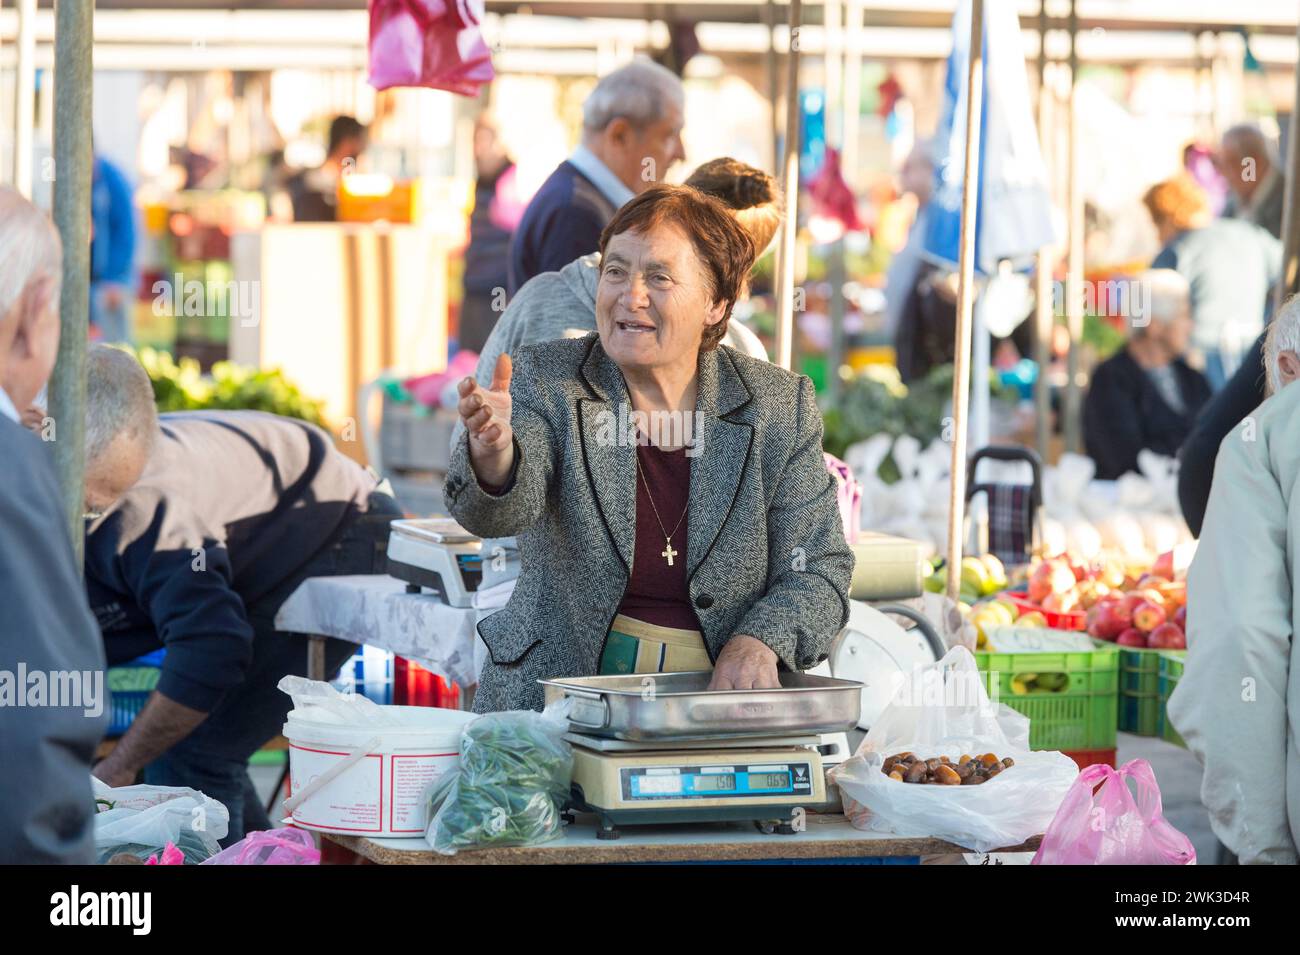 Market day on the Constanza Bastion of the Venetian city walls of Nicosia. trader with their market stall. Stock Photo